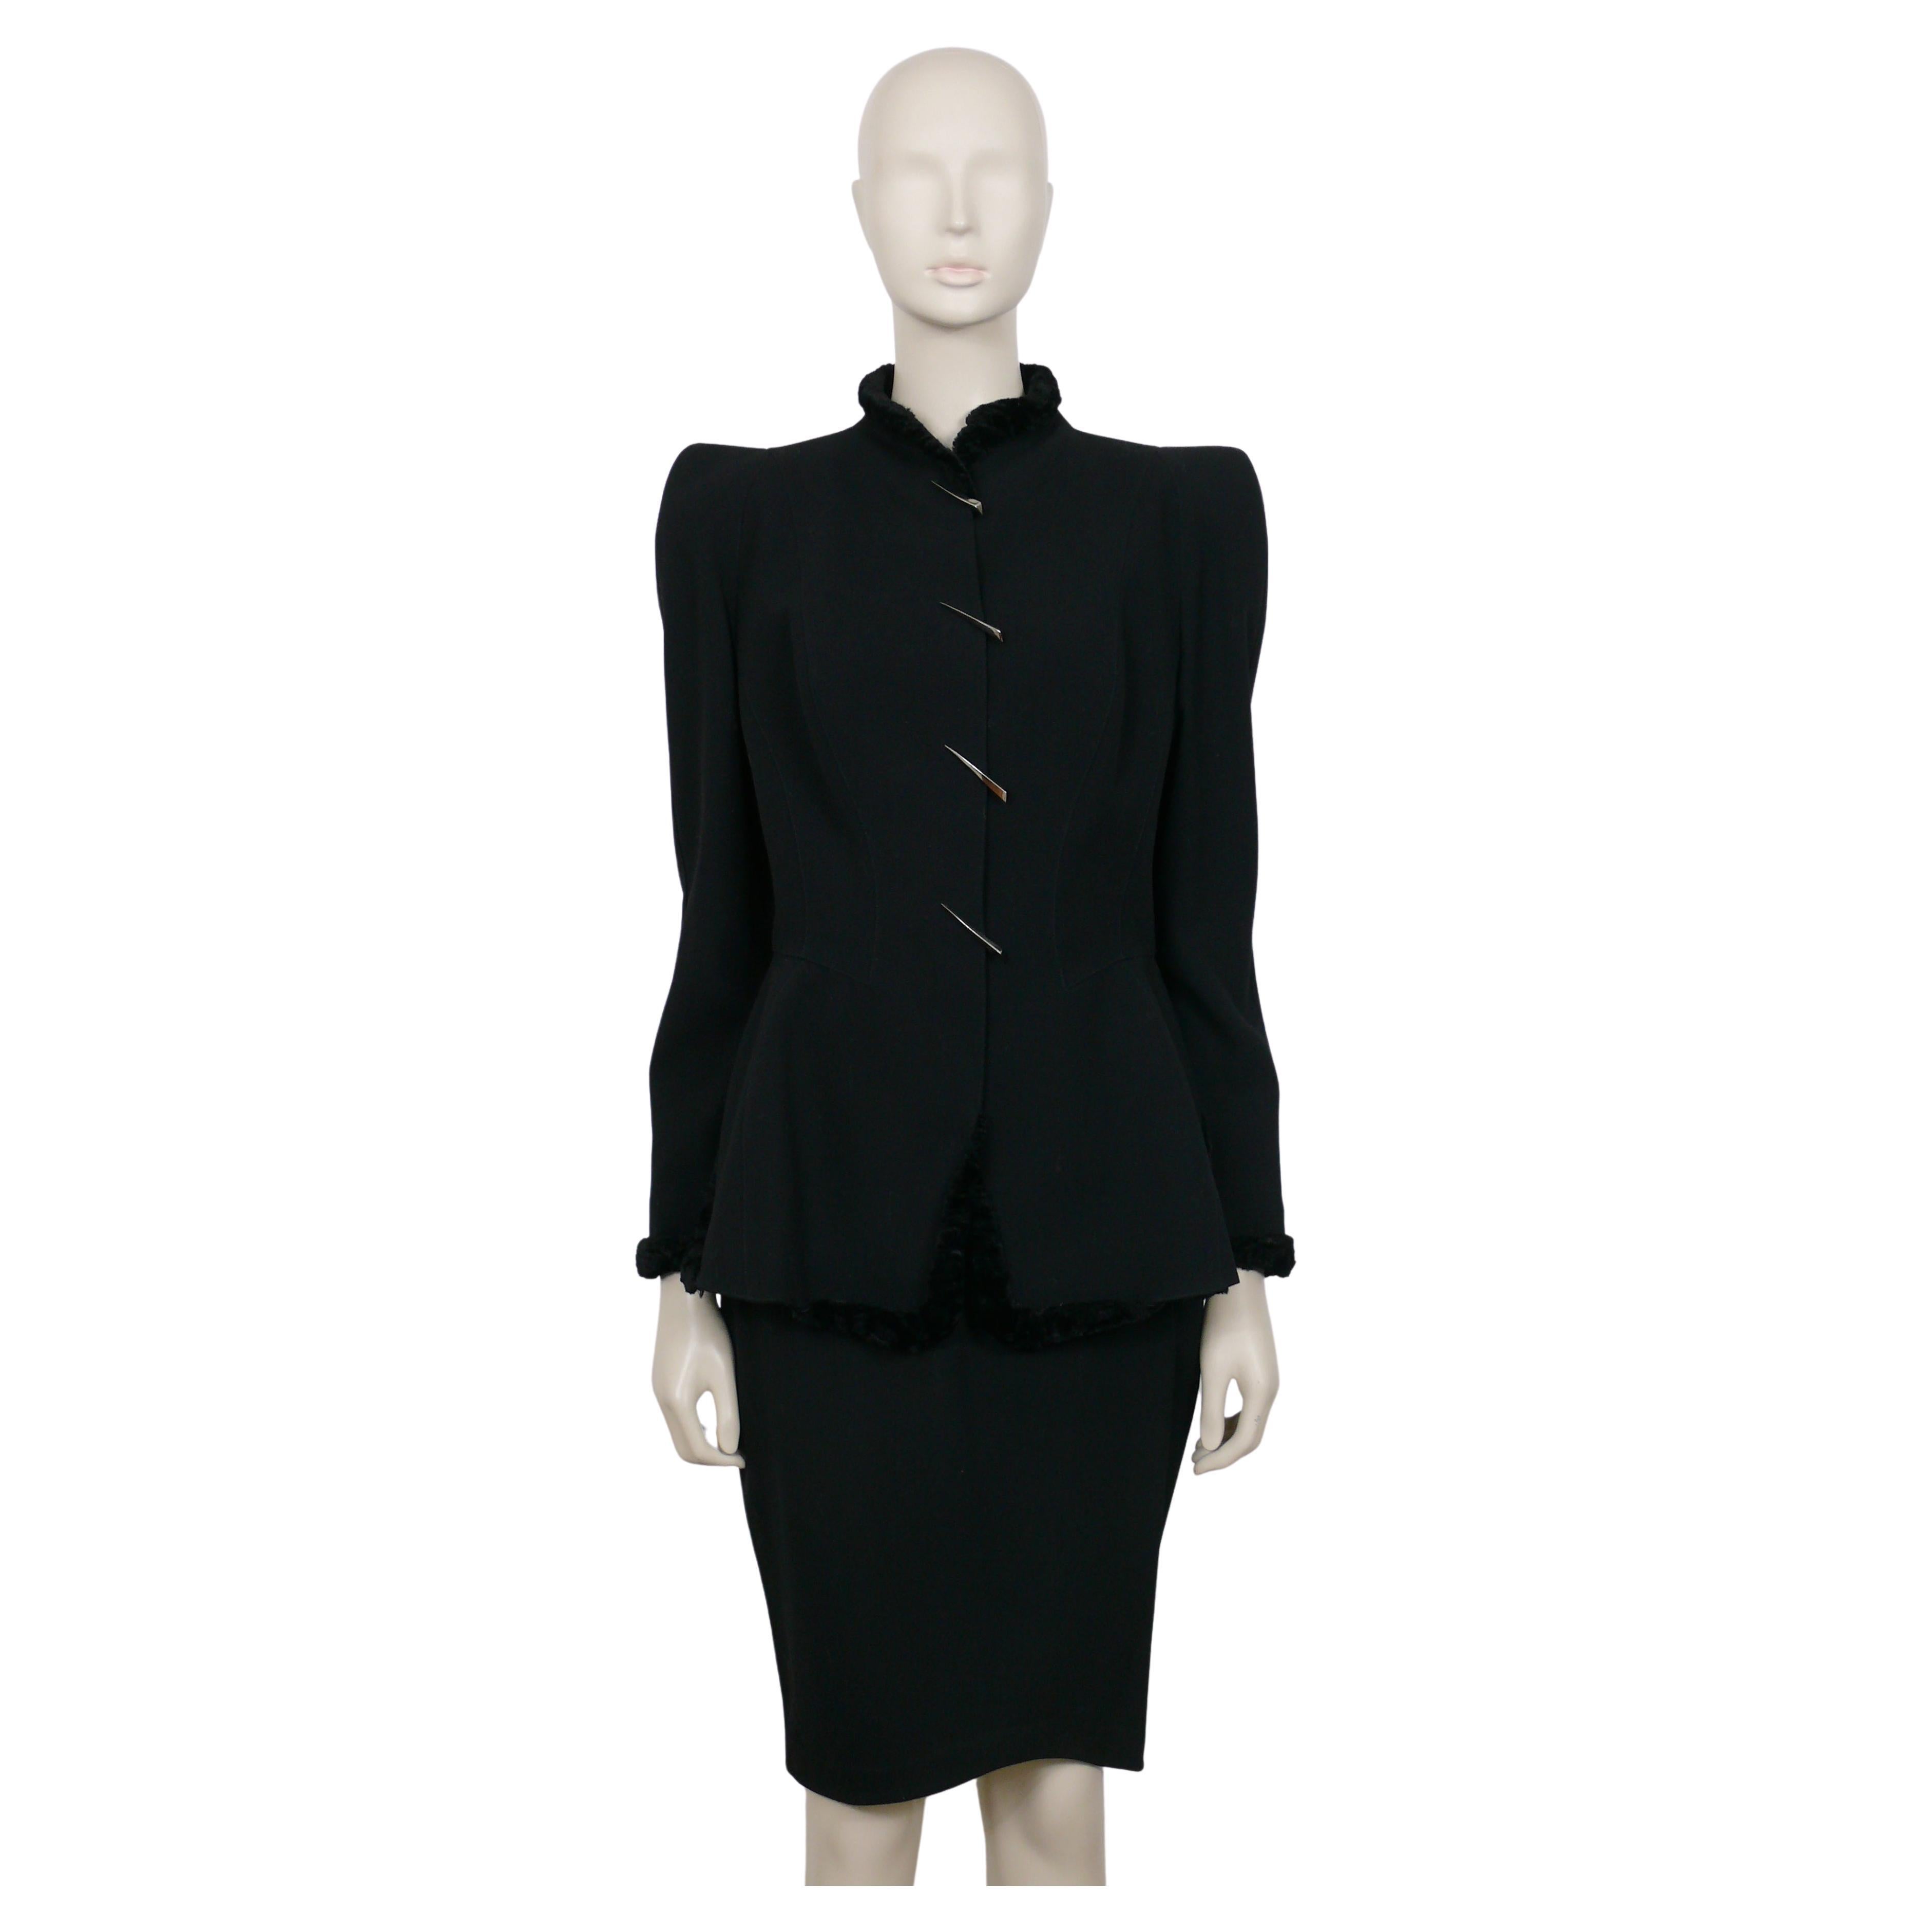 Thierry Mugler Vintage Black Wool & Claw Ornaments Skirt Suit